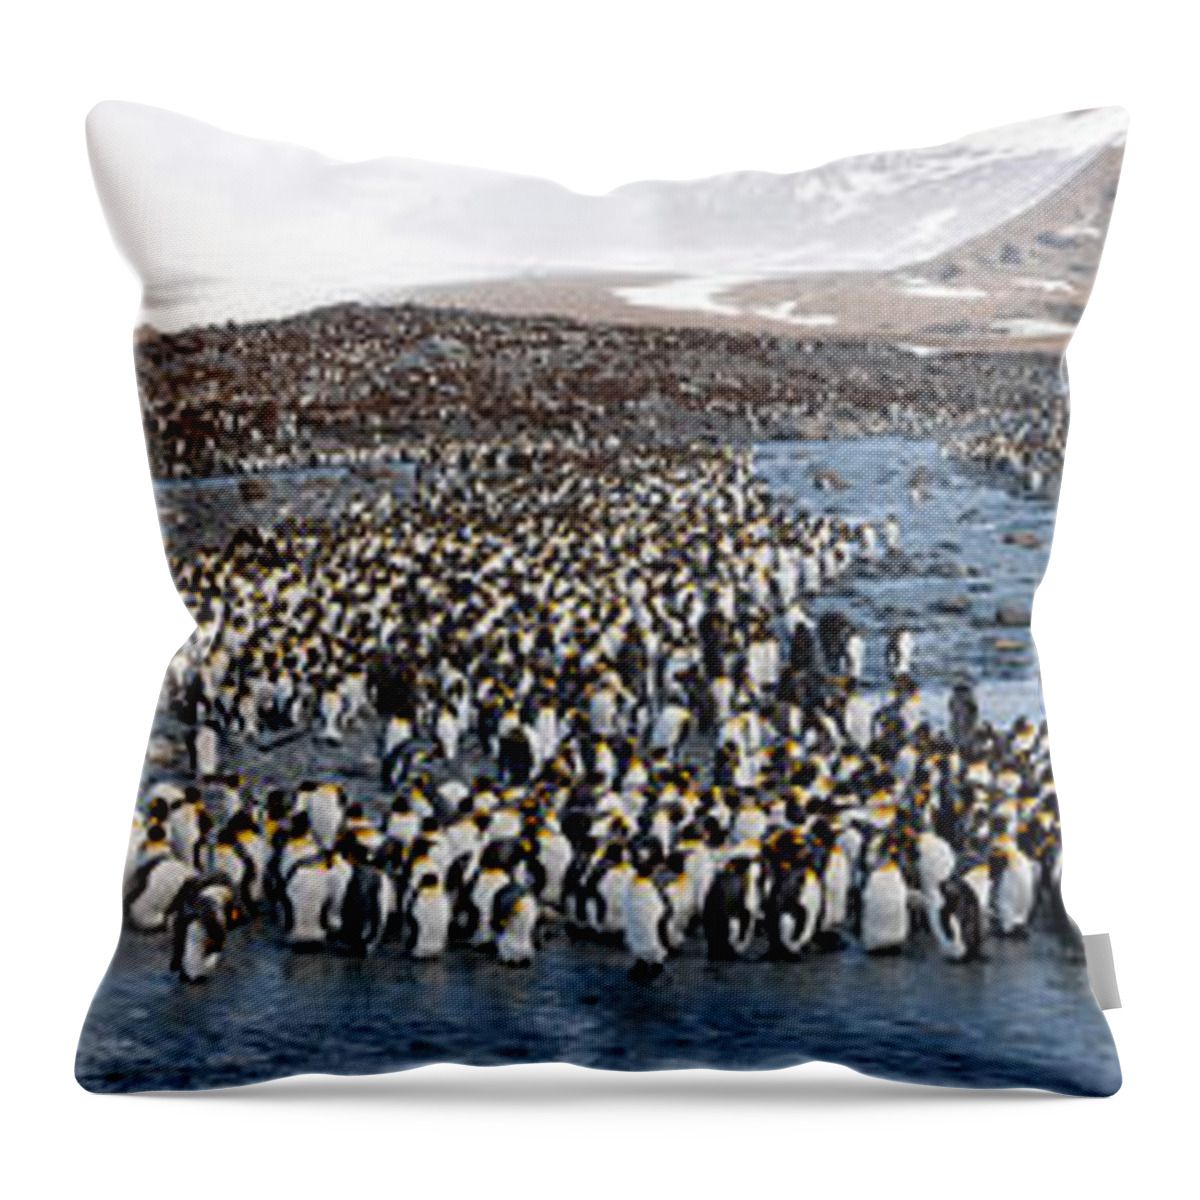 Photography Throw Pillow featuring the photograph King Penguins Aptenodytes Patagonicus #1 by Panoramic Images